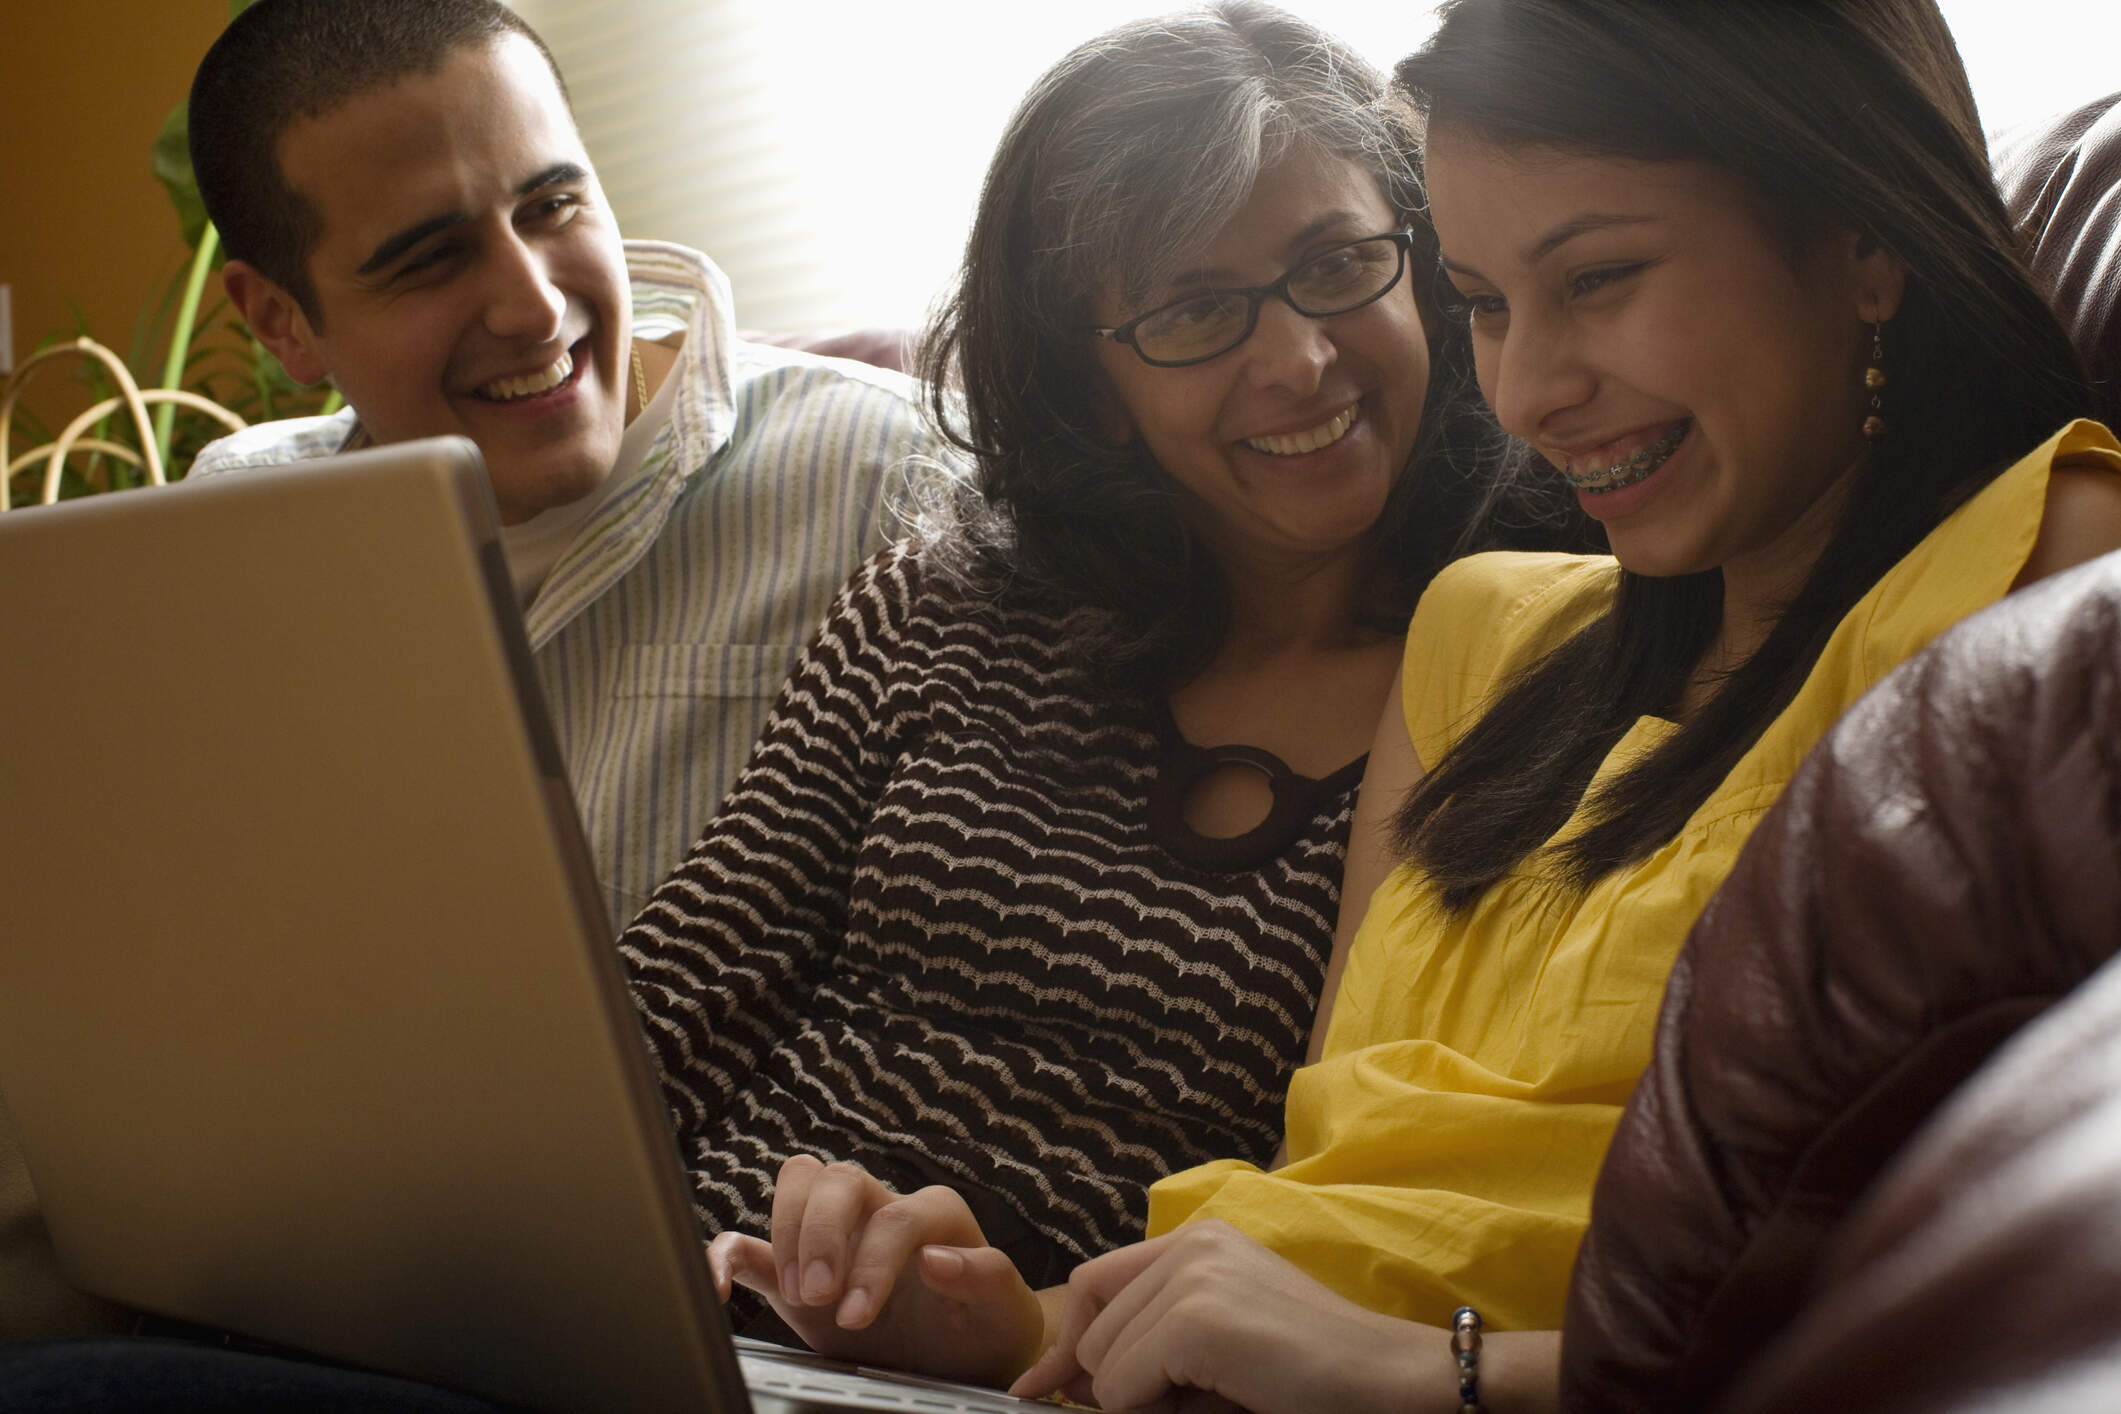 Parents in discussion with their teenager who is looking at their laptop